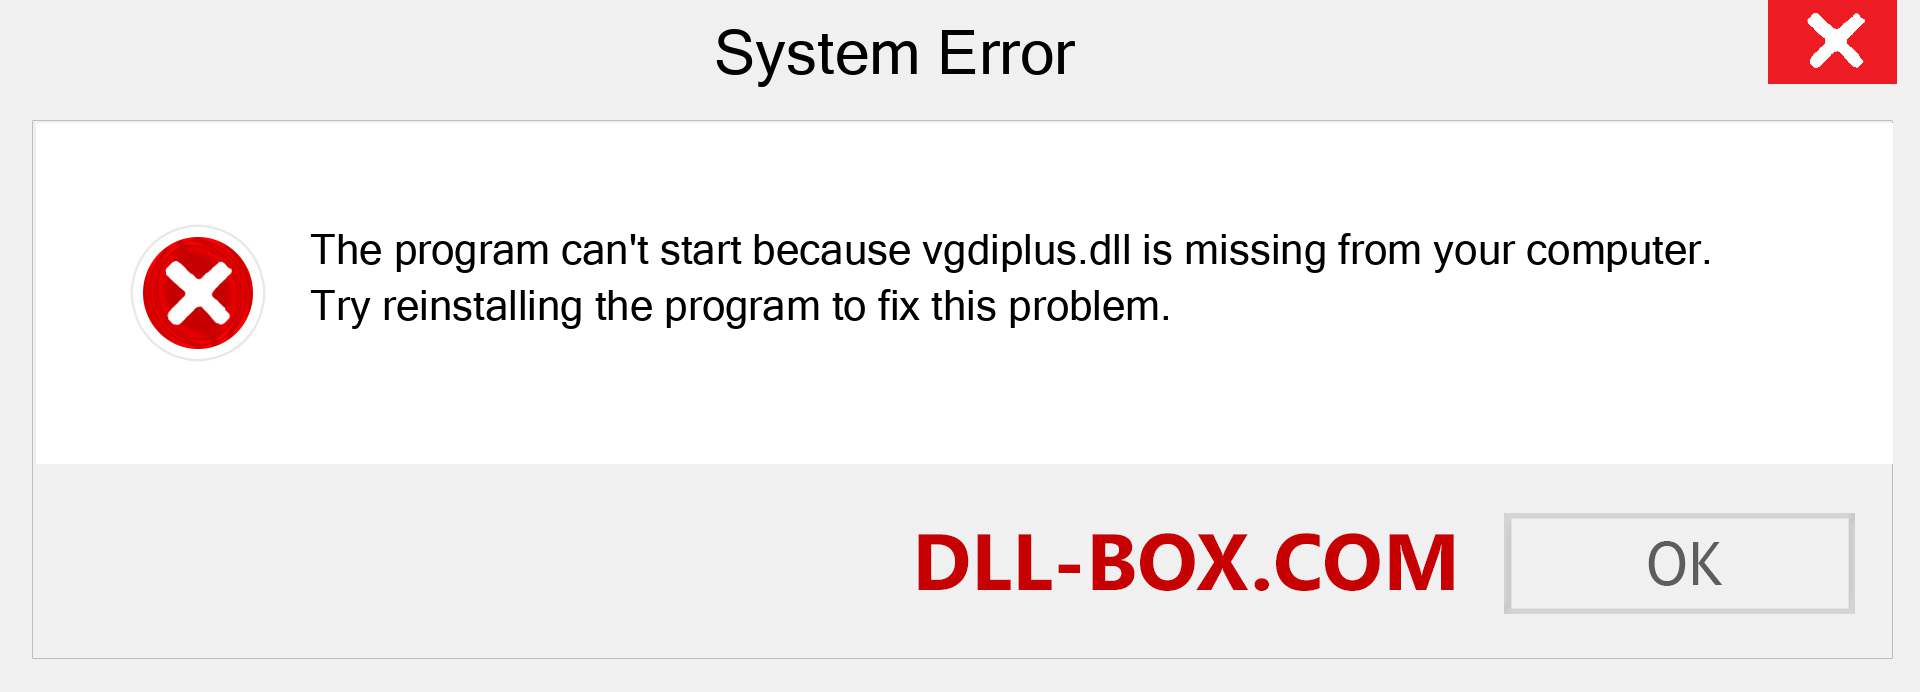  vgdiplus.dll file is missing?. Download for Windows 7, 8, 10 - Fix  vgdiplus dll Missing Error on Windows, photos, images